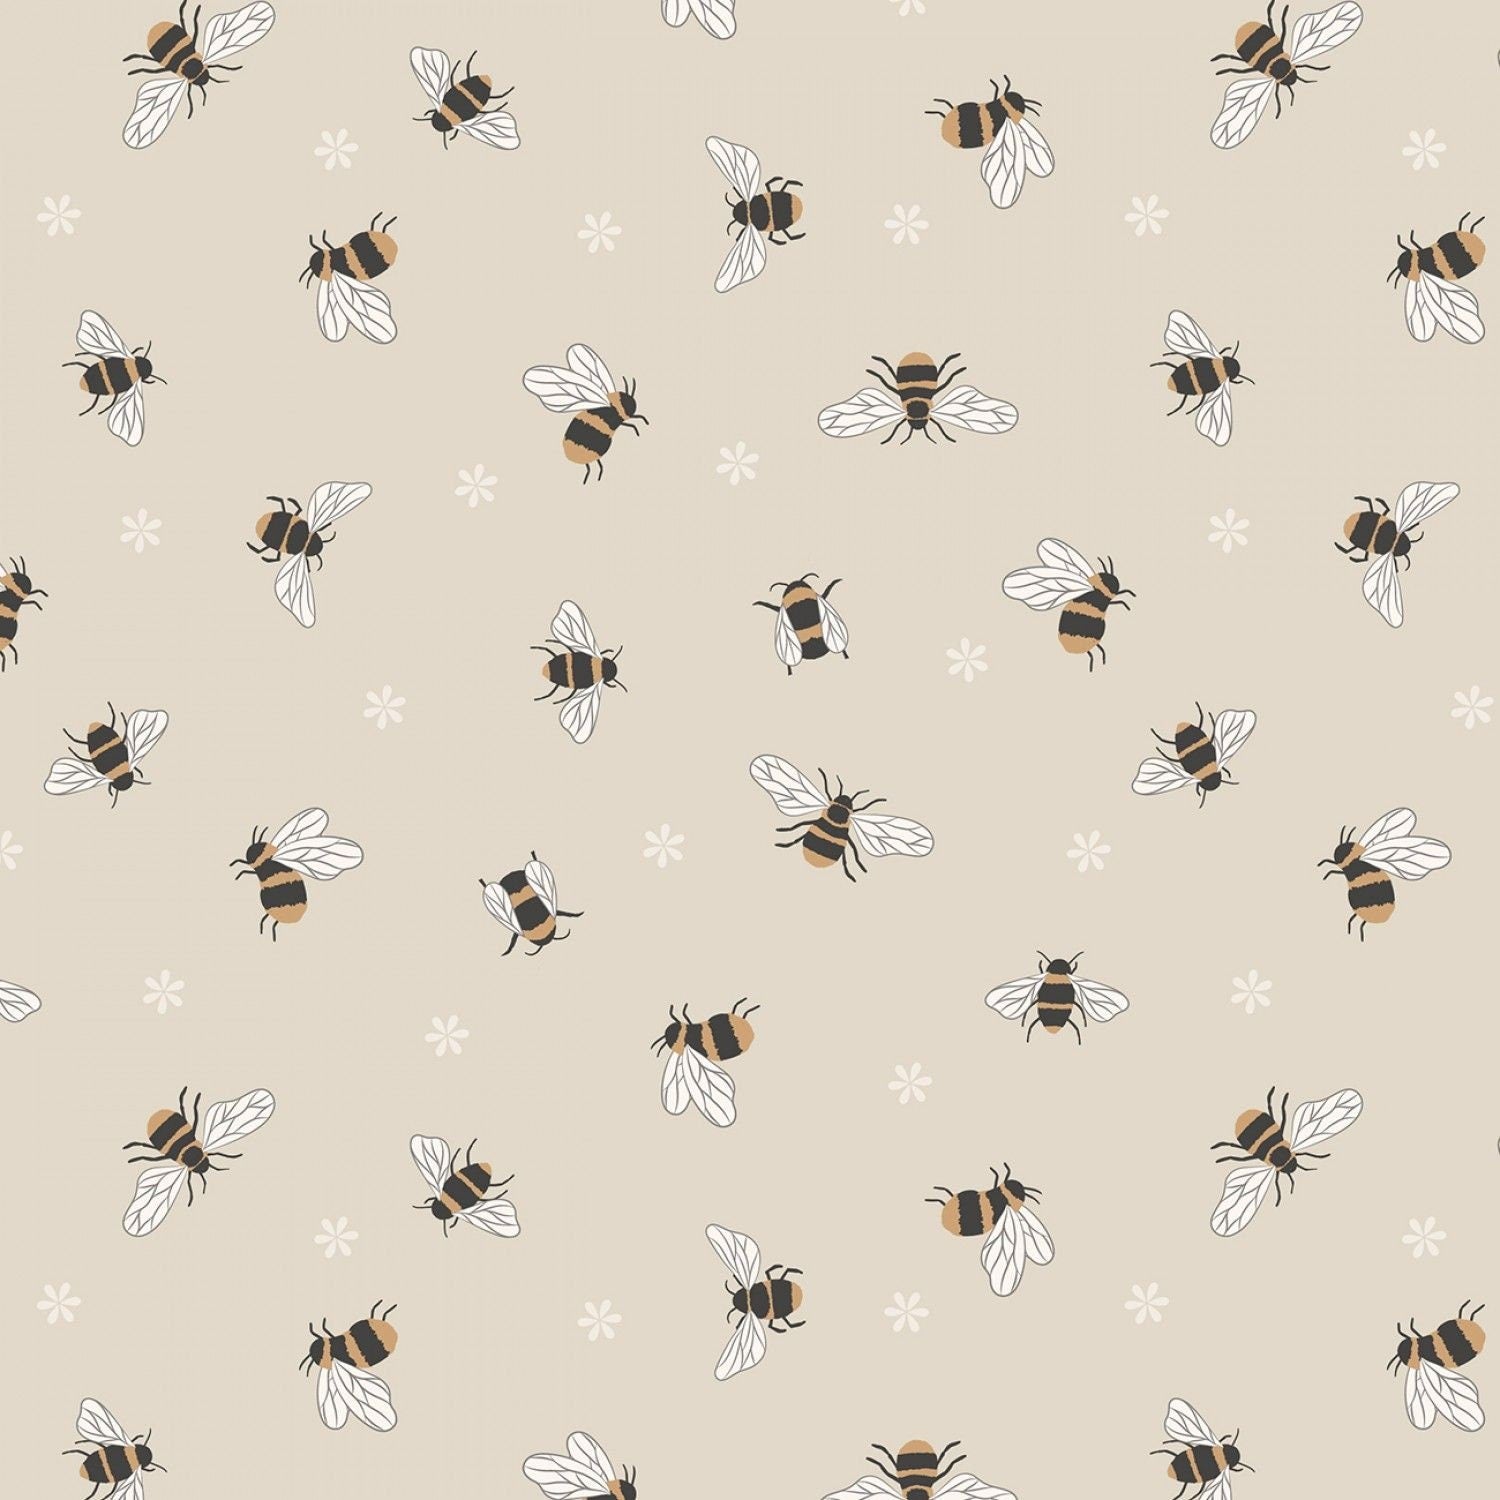 Queen Bee Bees on Dark Cream A503.1 Cotton Woven Fabric – The Fabric Candy  Shoppe